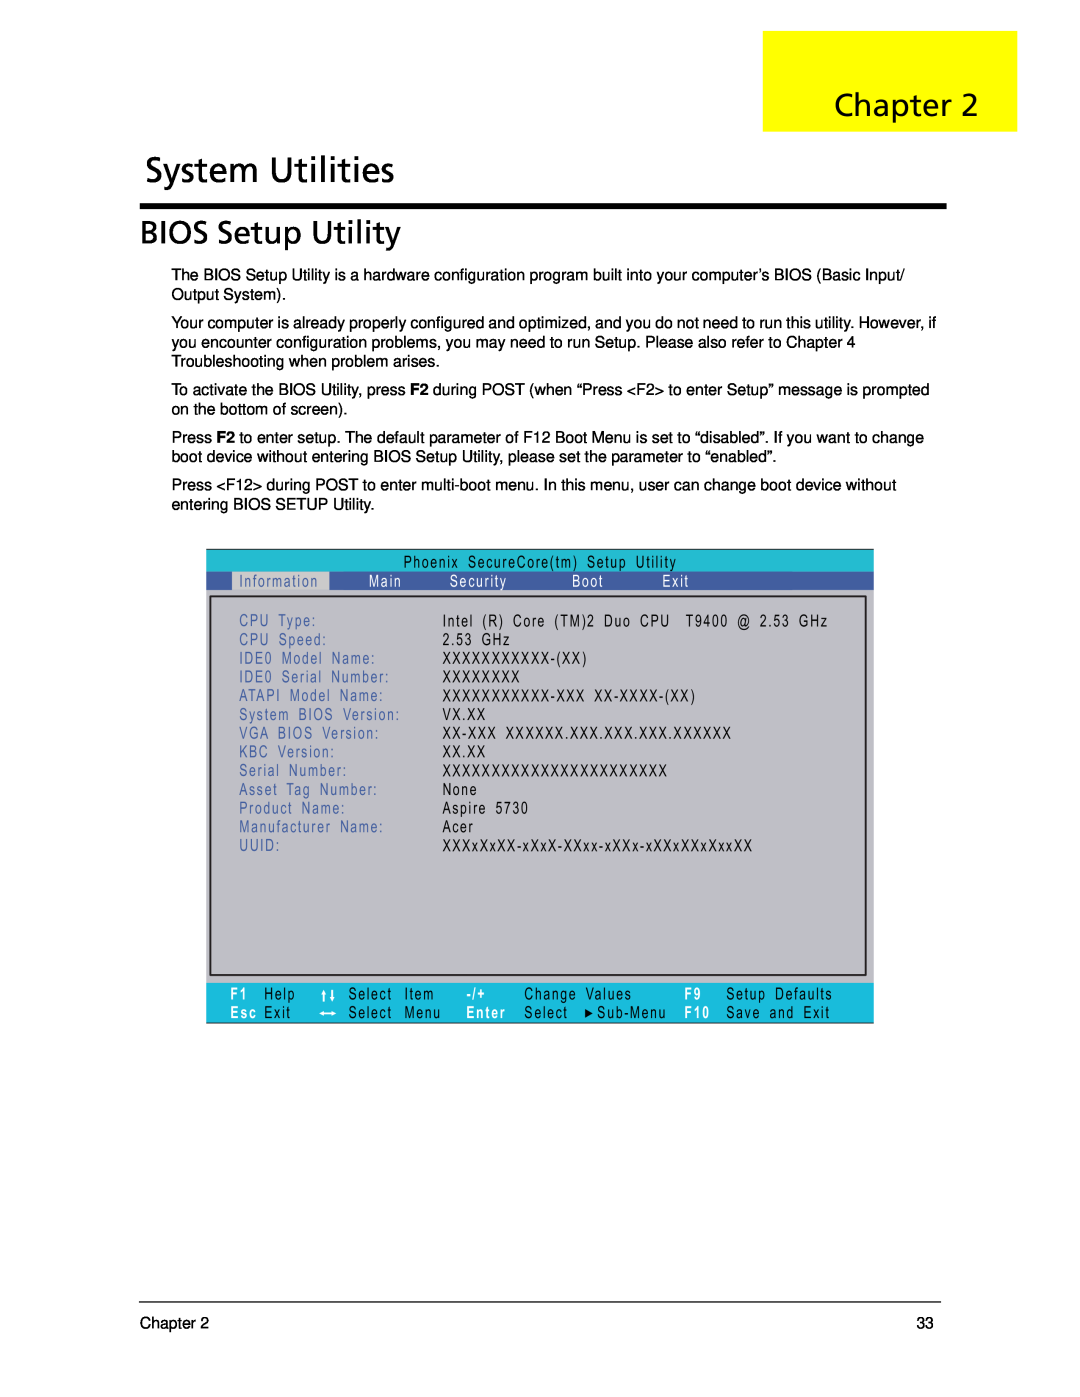 Acer 5330 manual System Utilities, BIOS Setup Utility, Chapter, Security, Boot, Exit, Enter 